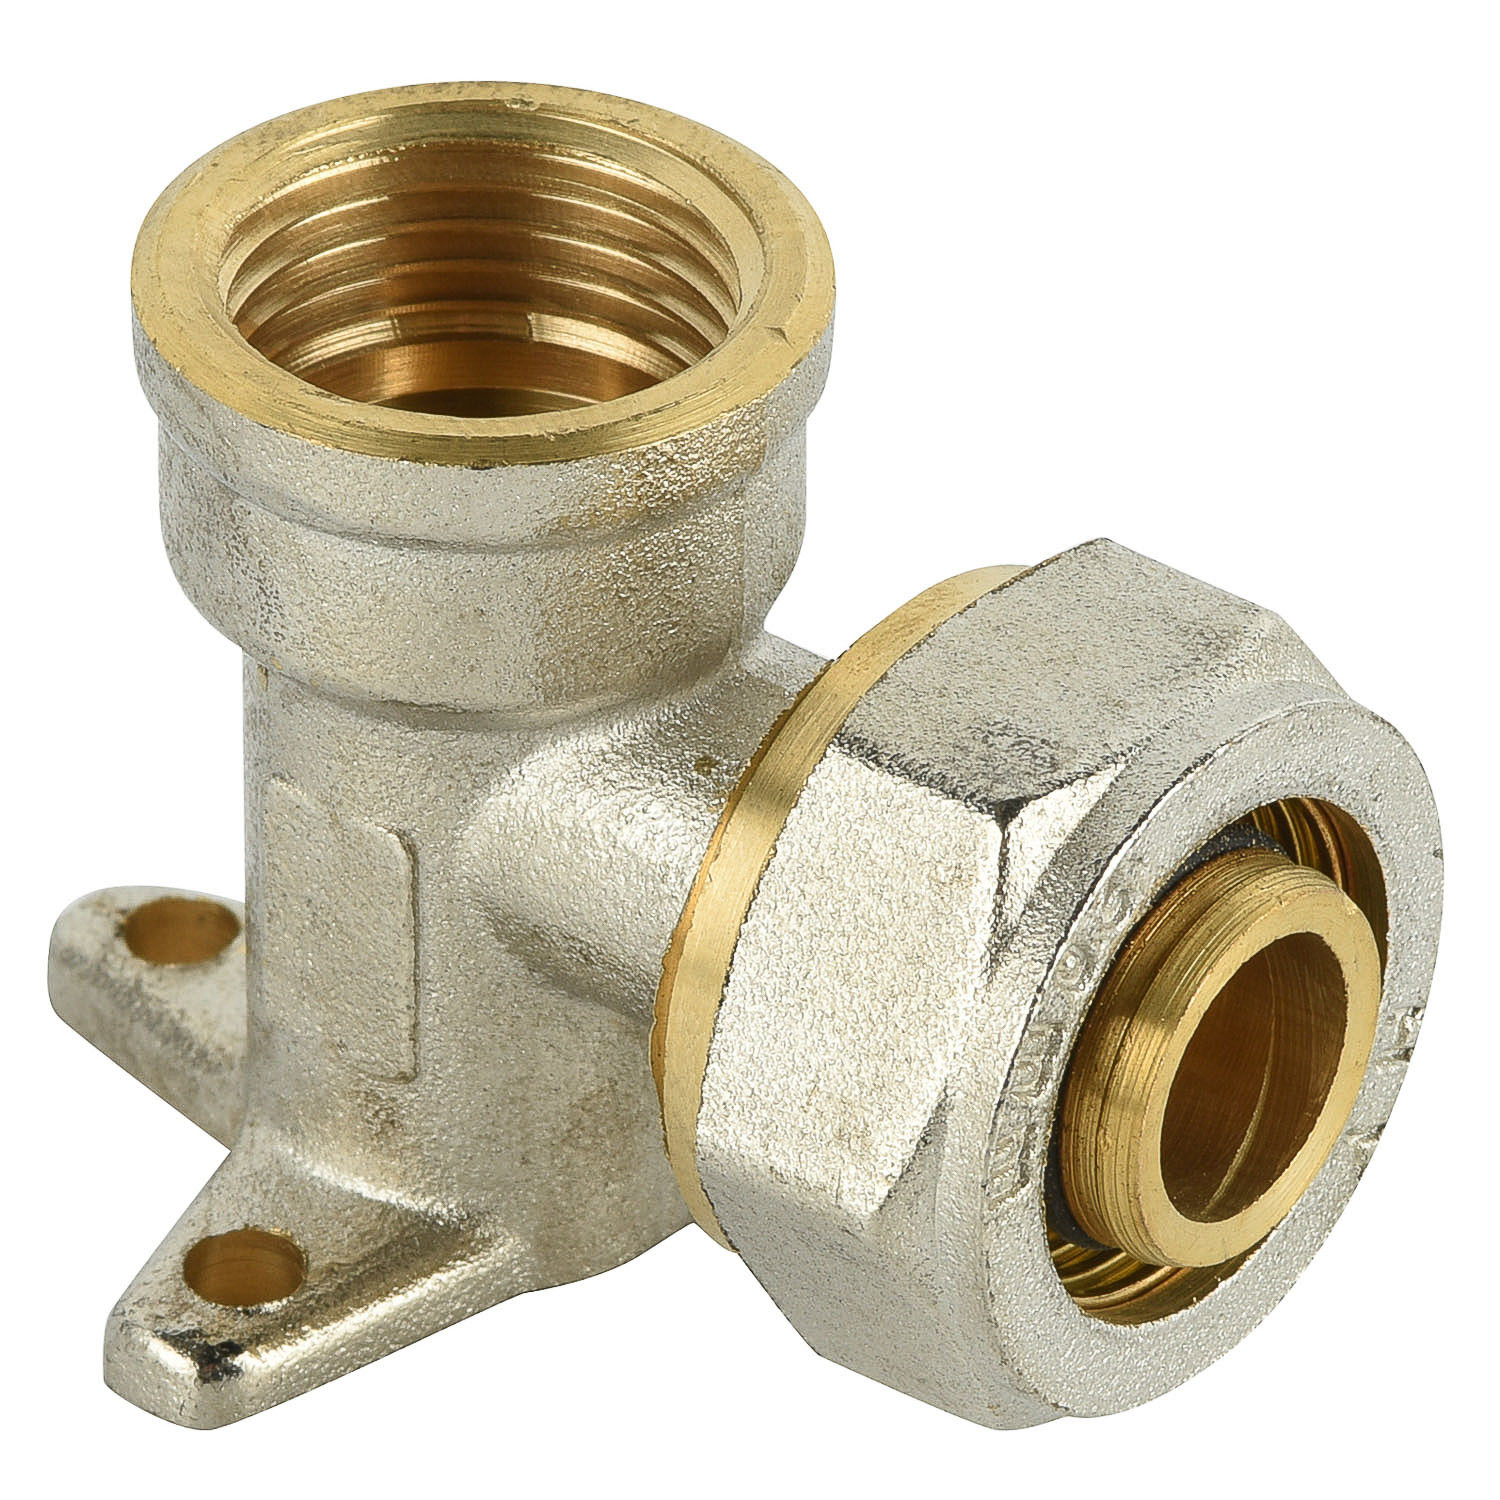 Best pex-al-pex pipe fittings double color brass Tee Male compression fittings for pex-al-pex pipe wholesale